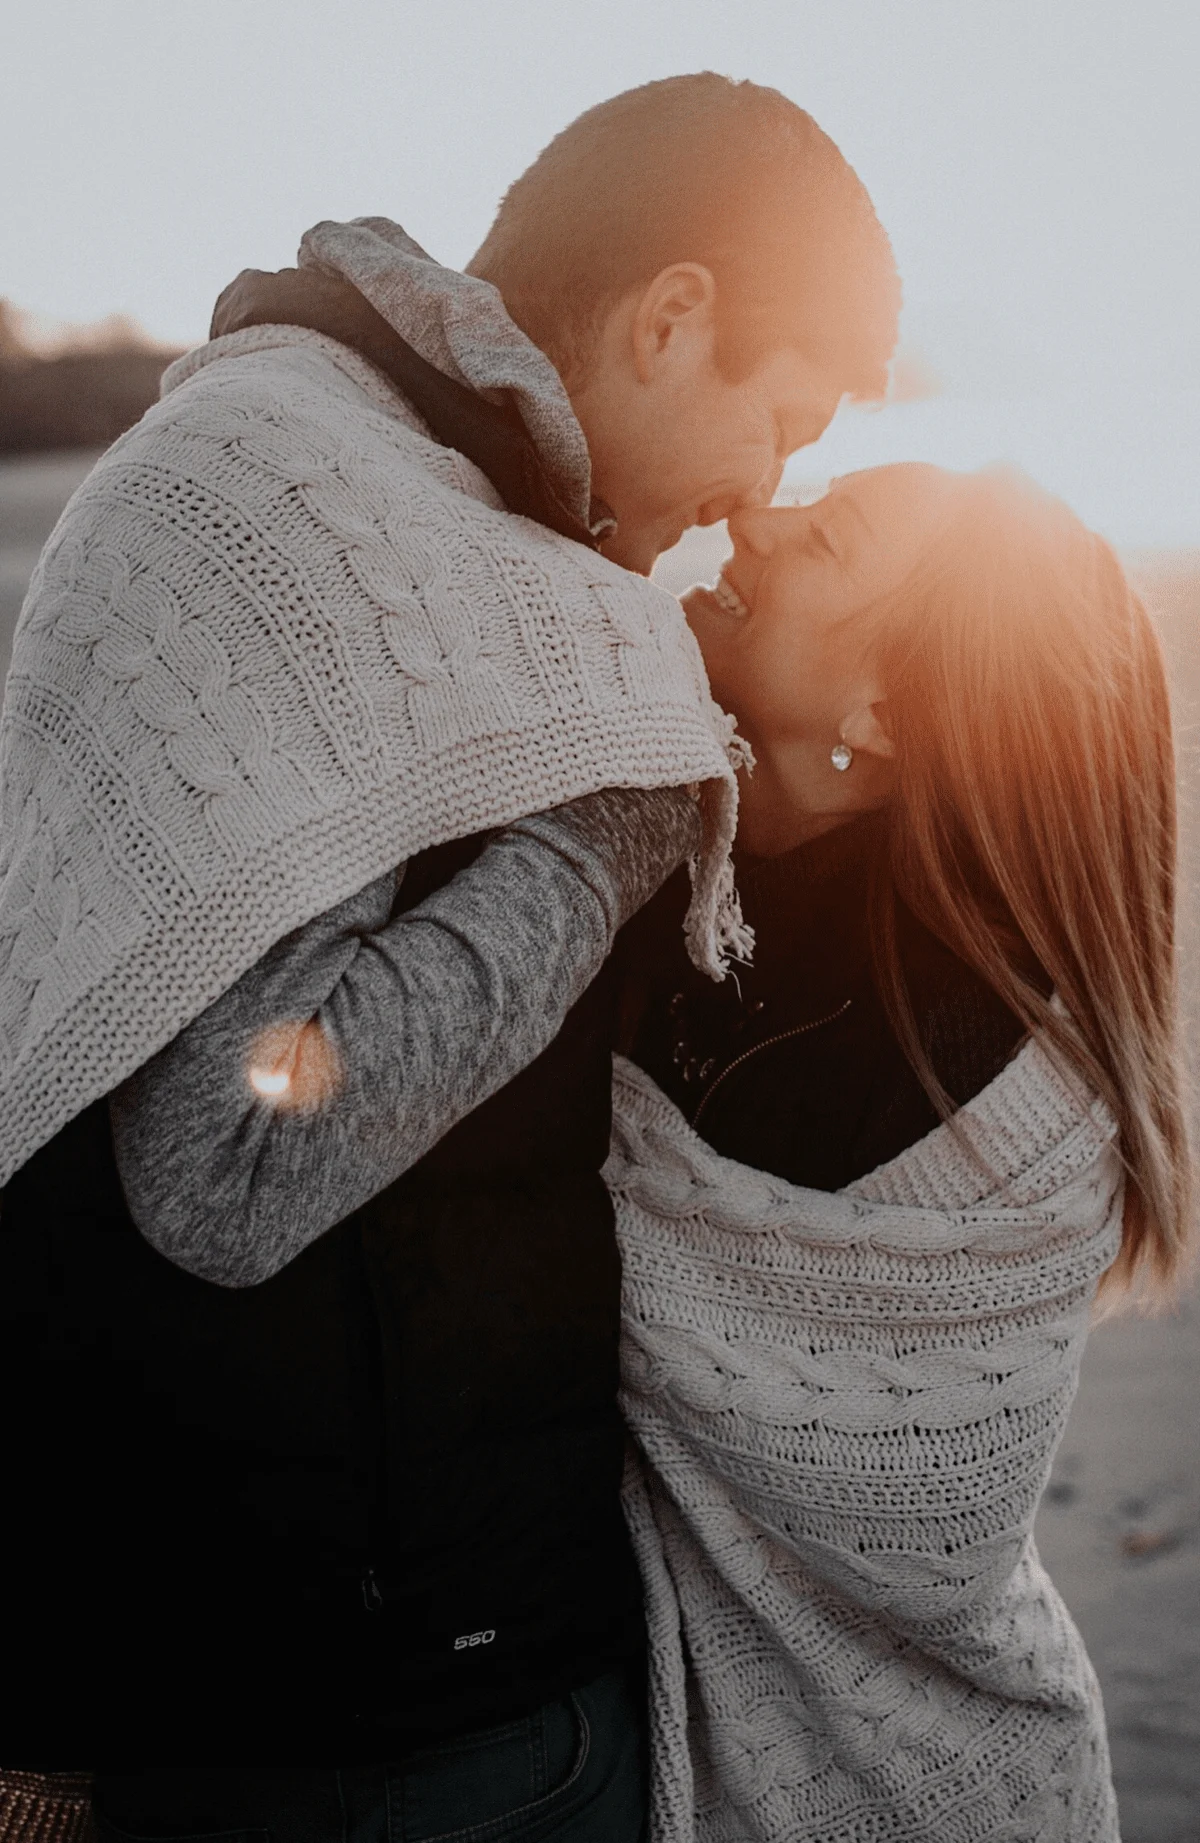 It's no secret that communication is essential to any relationship. But when you're a married couple, it's even more important. Here’s why communication in marriage is so important and how to improve yours.